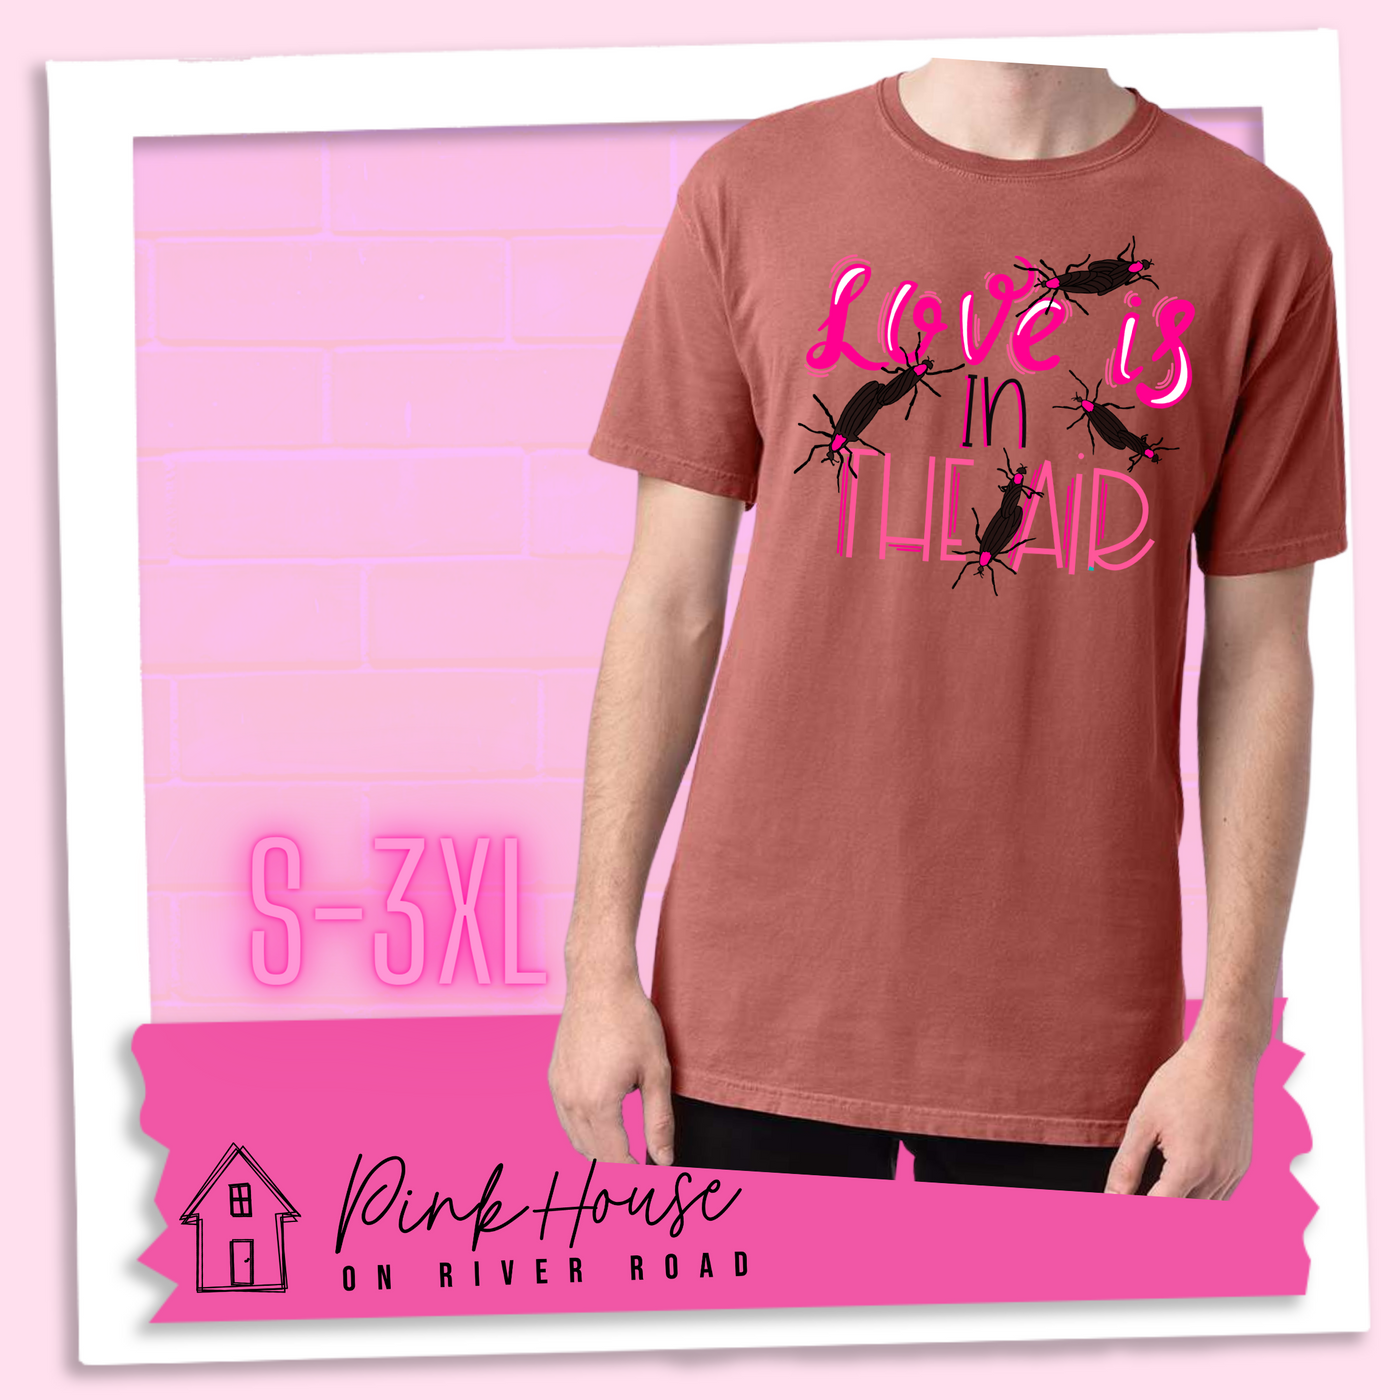 Nantucket Red Tee with Graphic. Graphic says " Love Is in the Air". "Love Is" is a hot pink cursive font with white highlights and hot pink accent lines underneath is the word "In" Is it in a black font with a hot pink highlight. on the bottom is "The Air" in Light pink with light pink accent lines. There are also black flying bugs with hot pink spots behind their heads